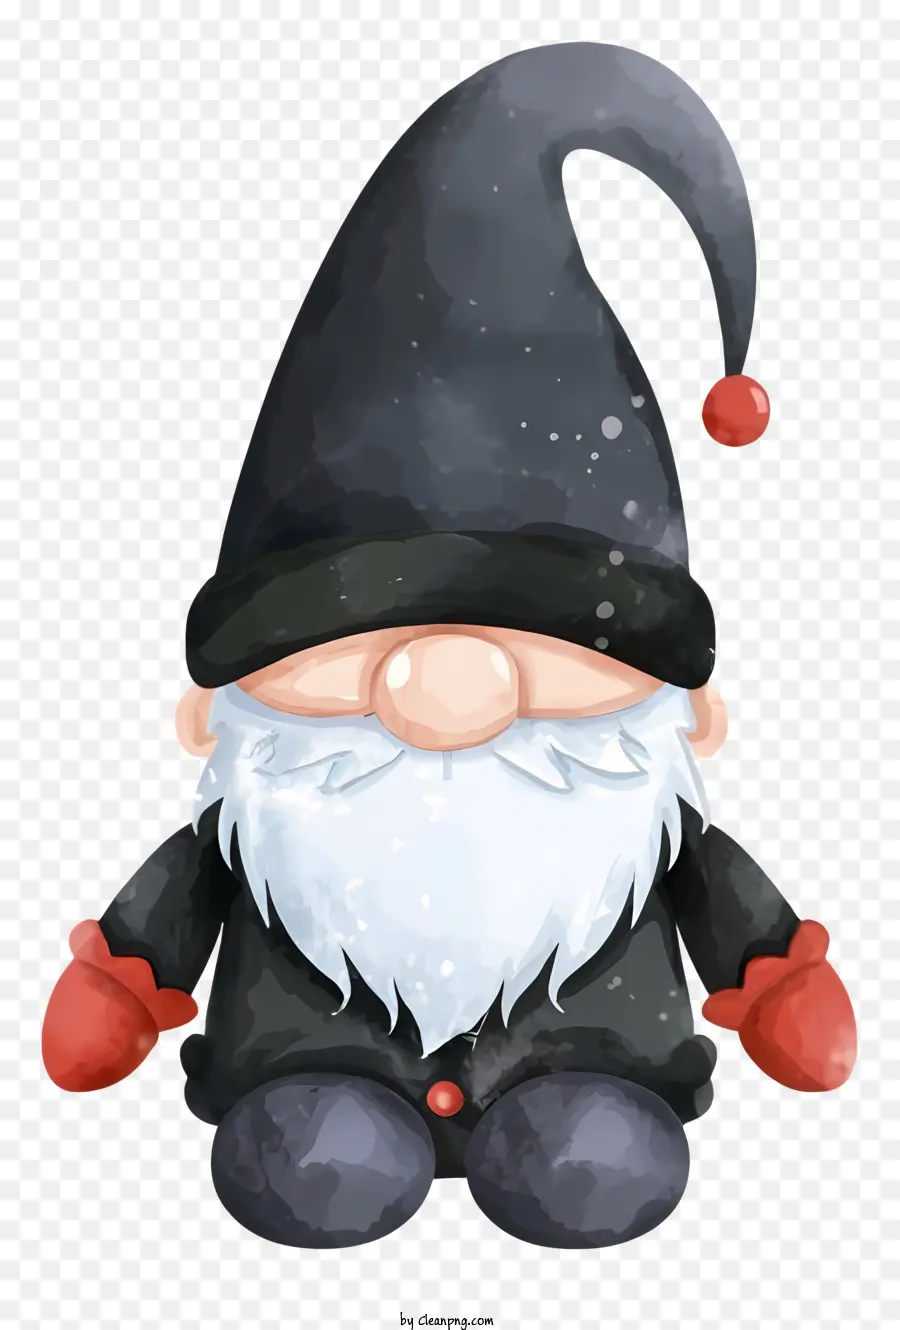 gnome mischievous gnome black and red outfit black hat white hair